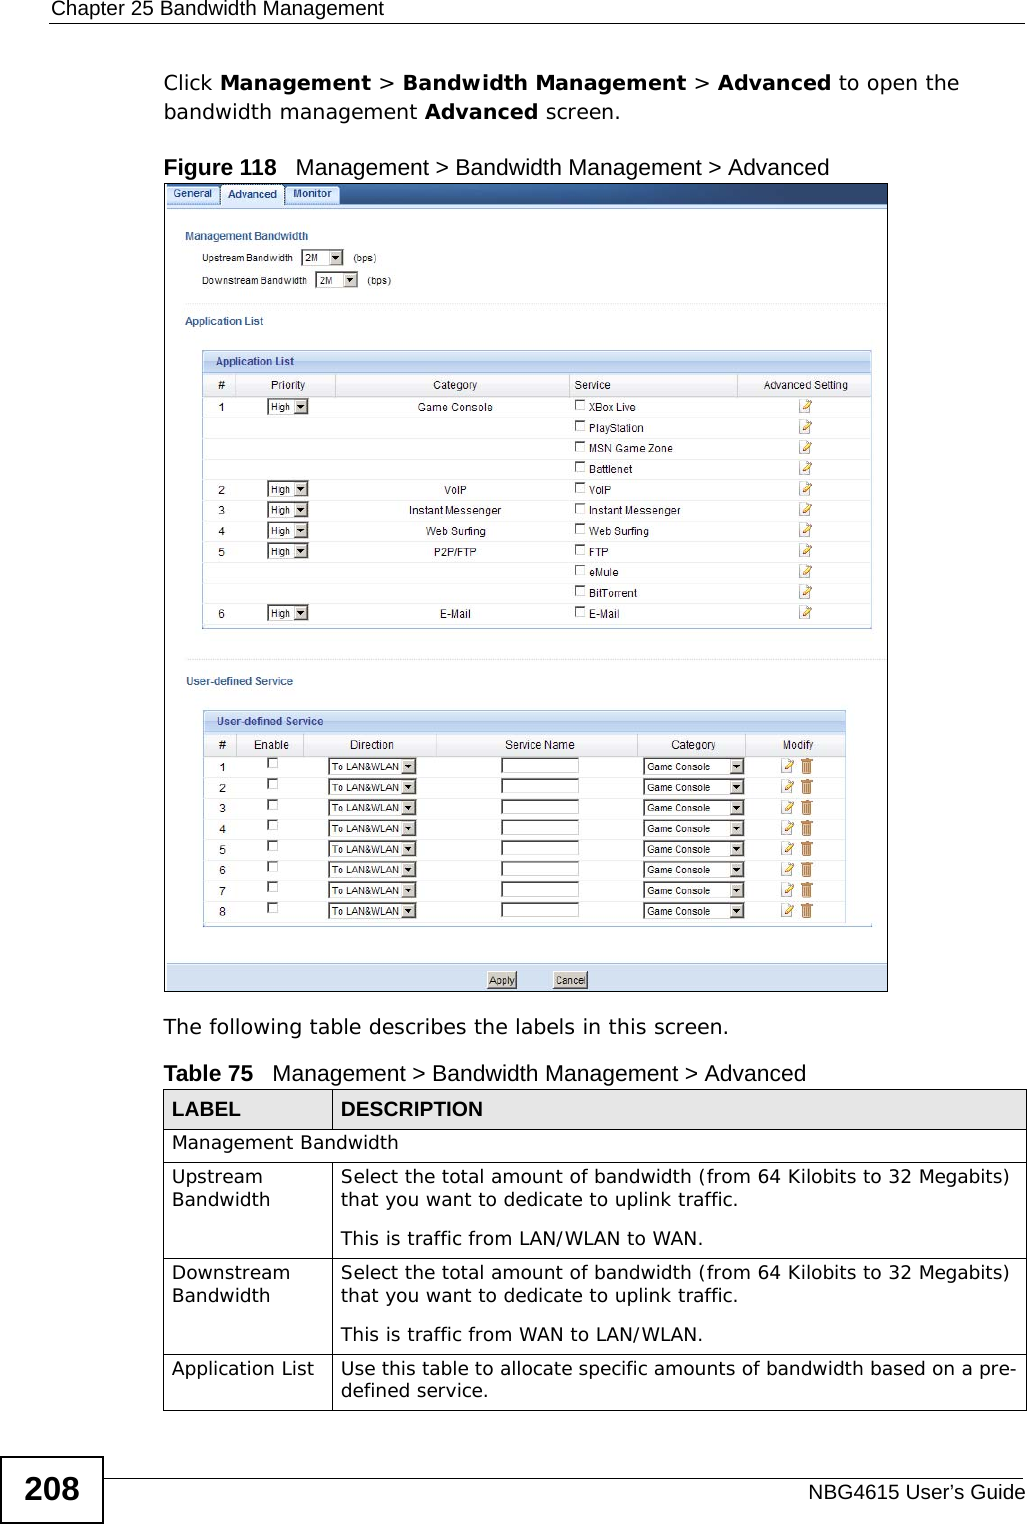 Chapter 25 Bandwidth ManagementNBG4615 User’s Guide208Click Management &gt; Bandwidth Management &gt; Advanced to open the bandwidth management Advanced screen.Figure 118   Management &gt; Bandwidth Management &gt; Advanced The following table describes the labels in this screen.Table 75   Management &gt; Bandwidth Management &gt; Advanced LABEL DESCRIPTIONManagement BandwidthUpstream Bandwidth Select the total amount of bandwidth (from 64 Kilobits to 32 Megabits) that you want to dedicate to uplink traffic. This is traffic from LAN/WLAN to WAN.Downstream Bandwidth Select the total amount of bandwidth (from 64 Kilobits to 32 Megabits) that you want to dedicate to uplink traffic. This is traffic from WAN to LAN/WLAN.Application List Use this table to allocate specific amounts of bandwidth based on a pre-defined service.